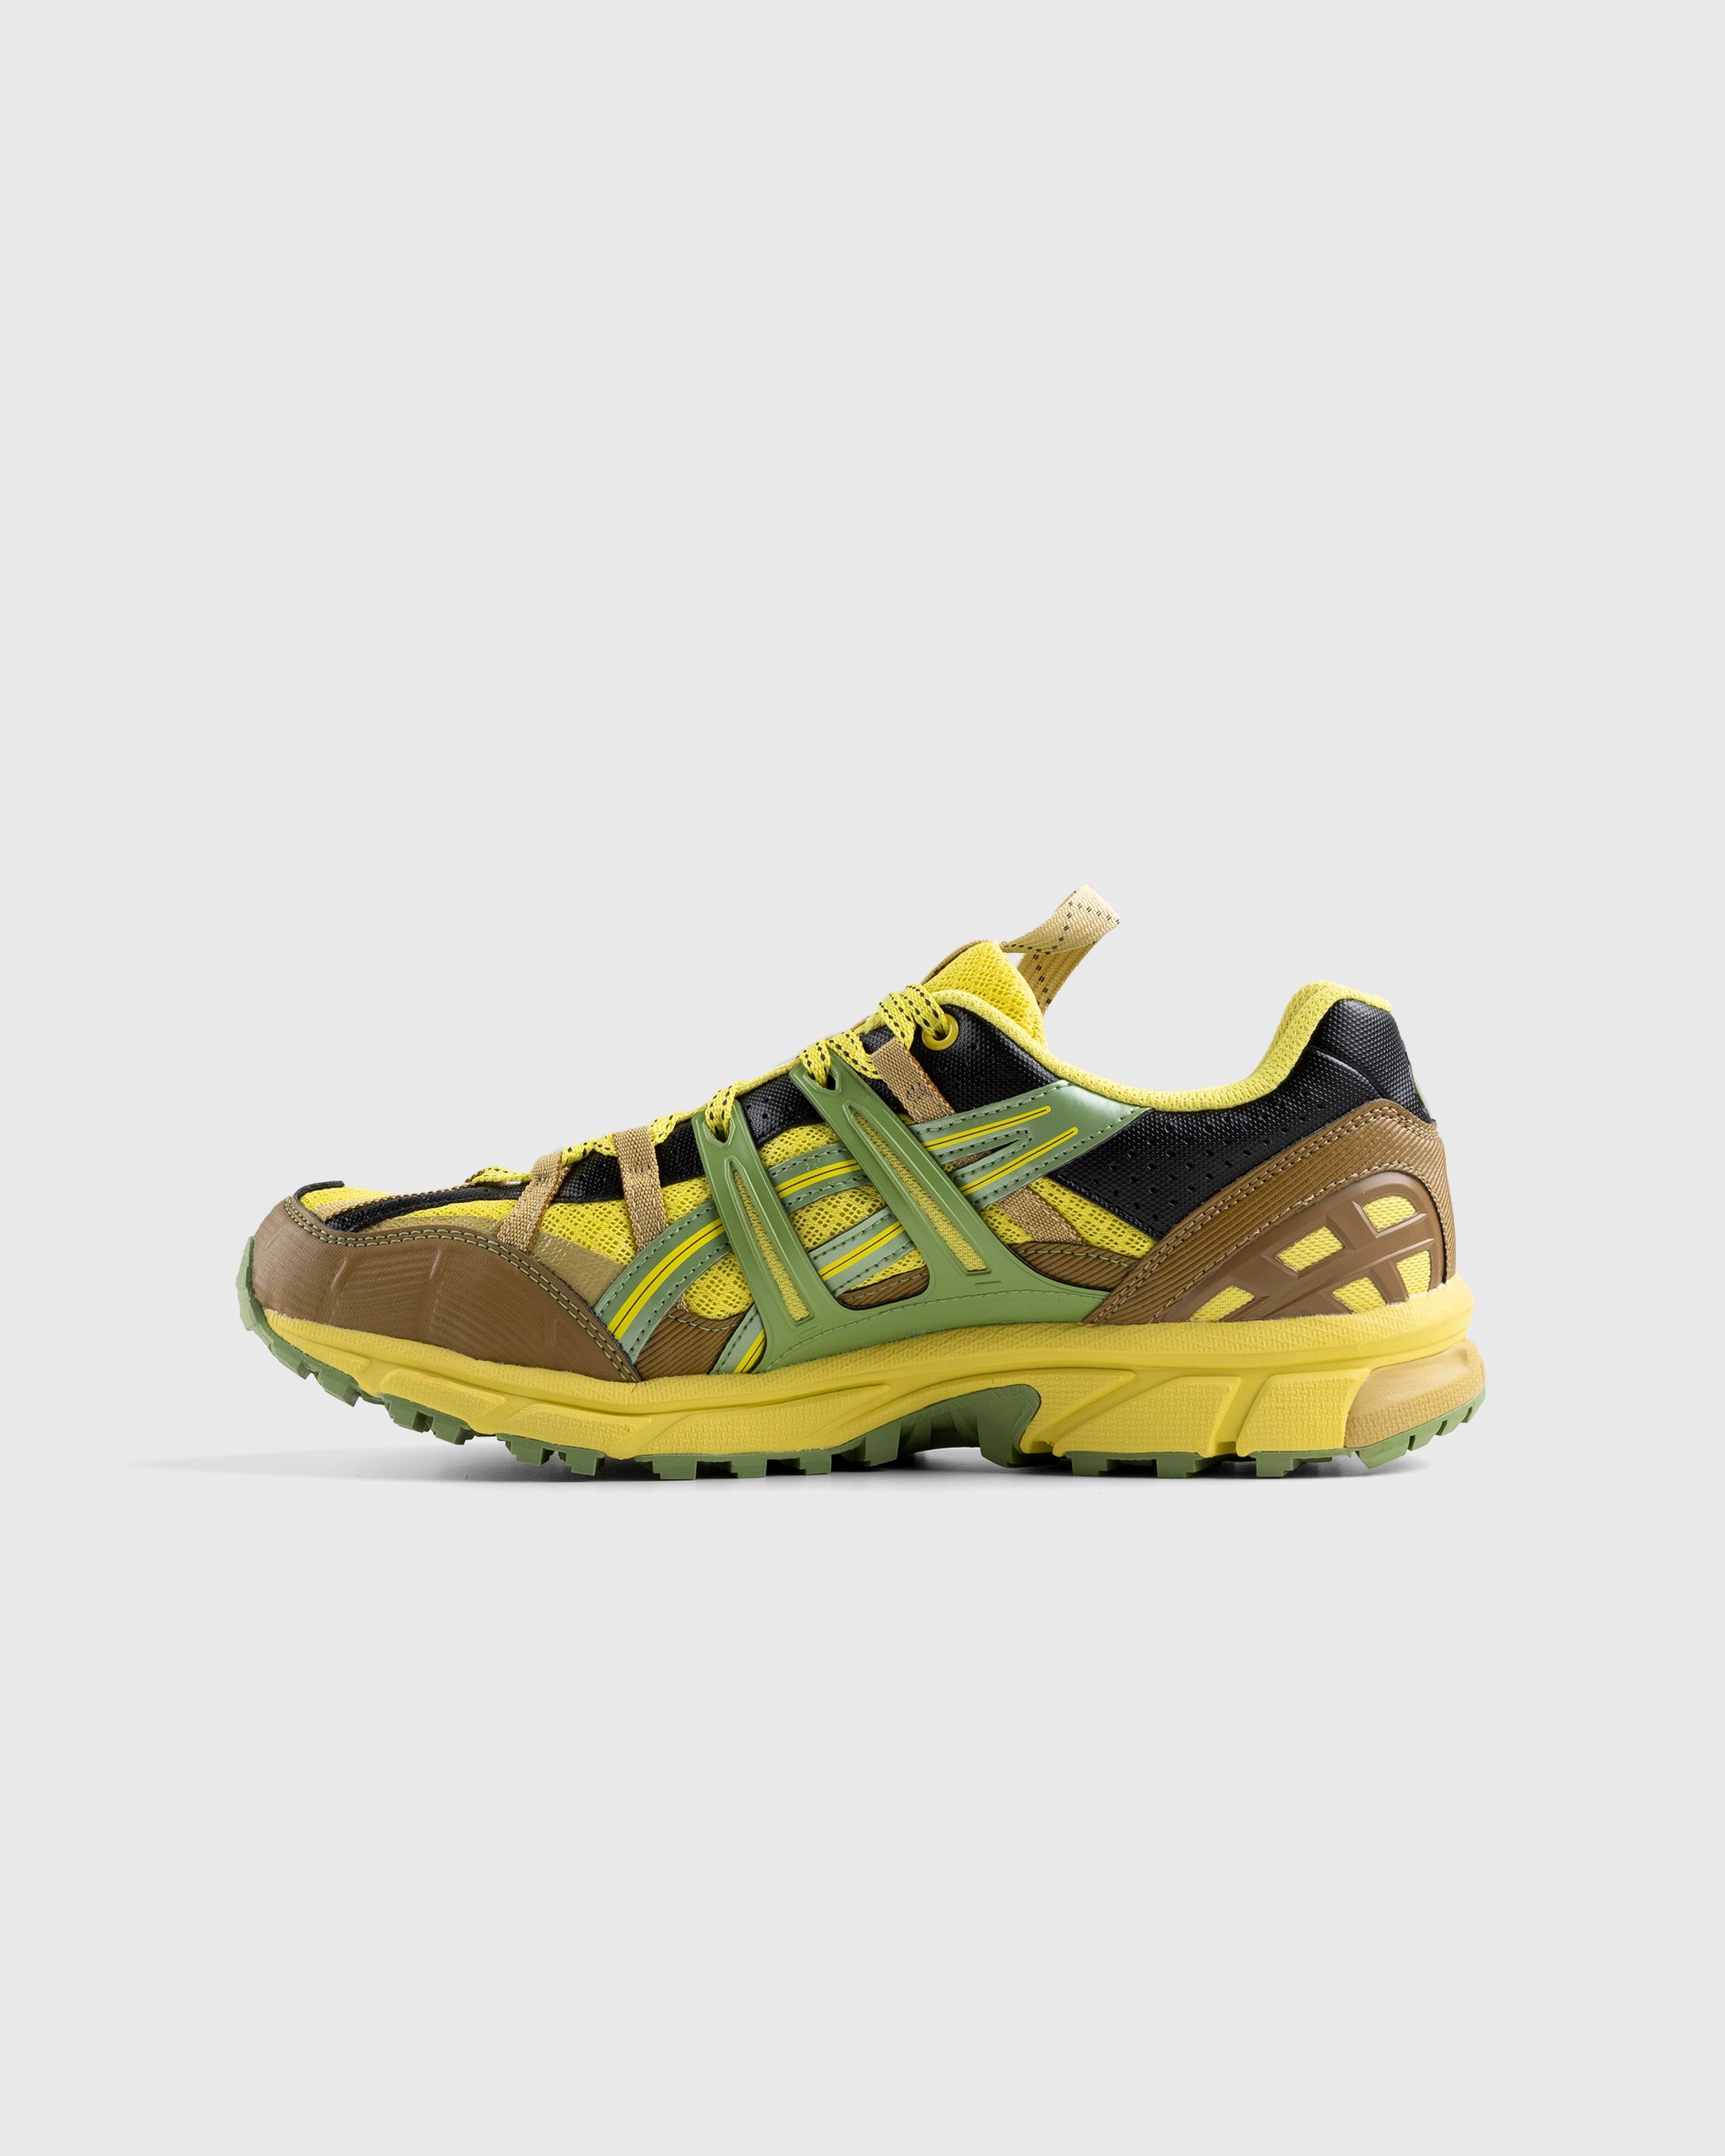 asics – HS4-S GEL-SONOMA 15-50 GTX Green Sheen/Espom - Low Top Sneakers - Yellow - Image 2